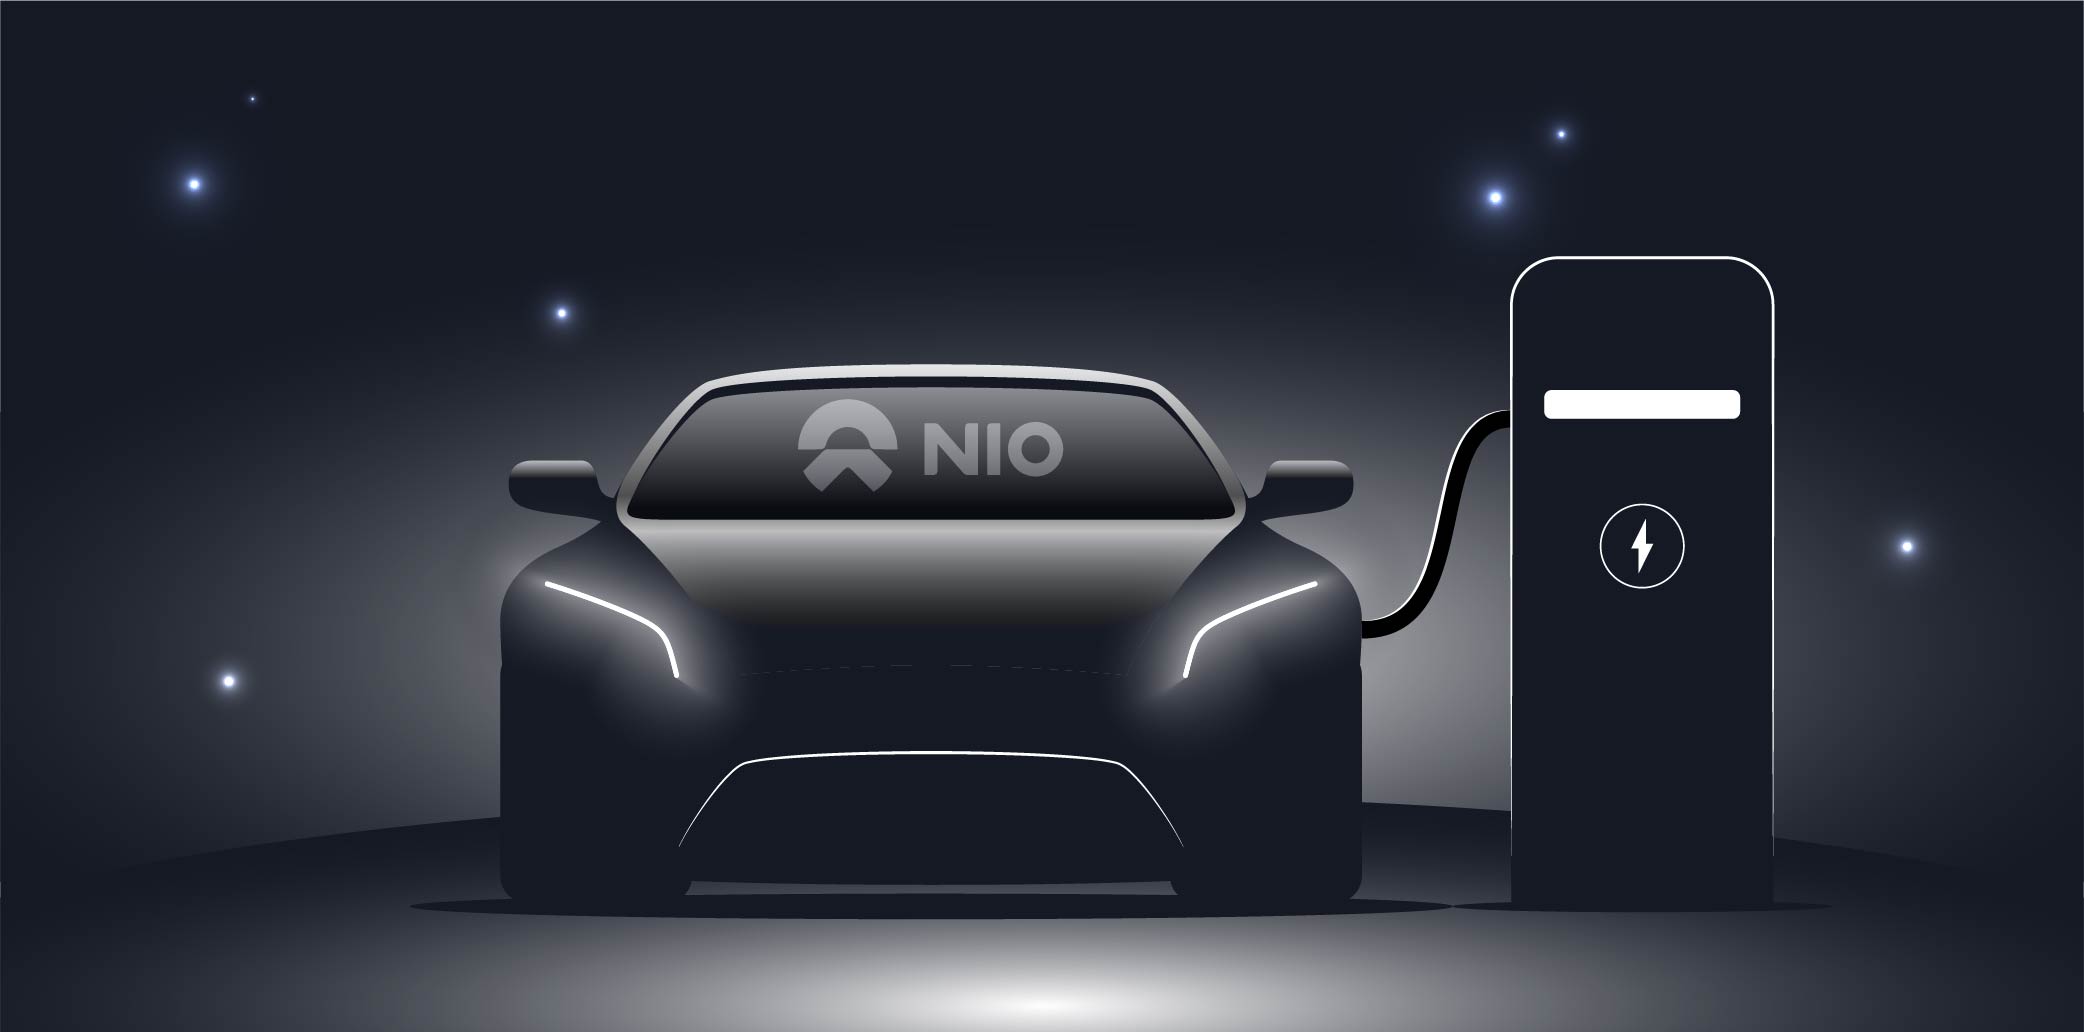 Nio’s Q3 losses narrow due to growing demand for EVs